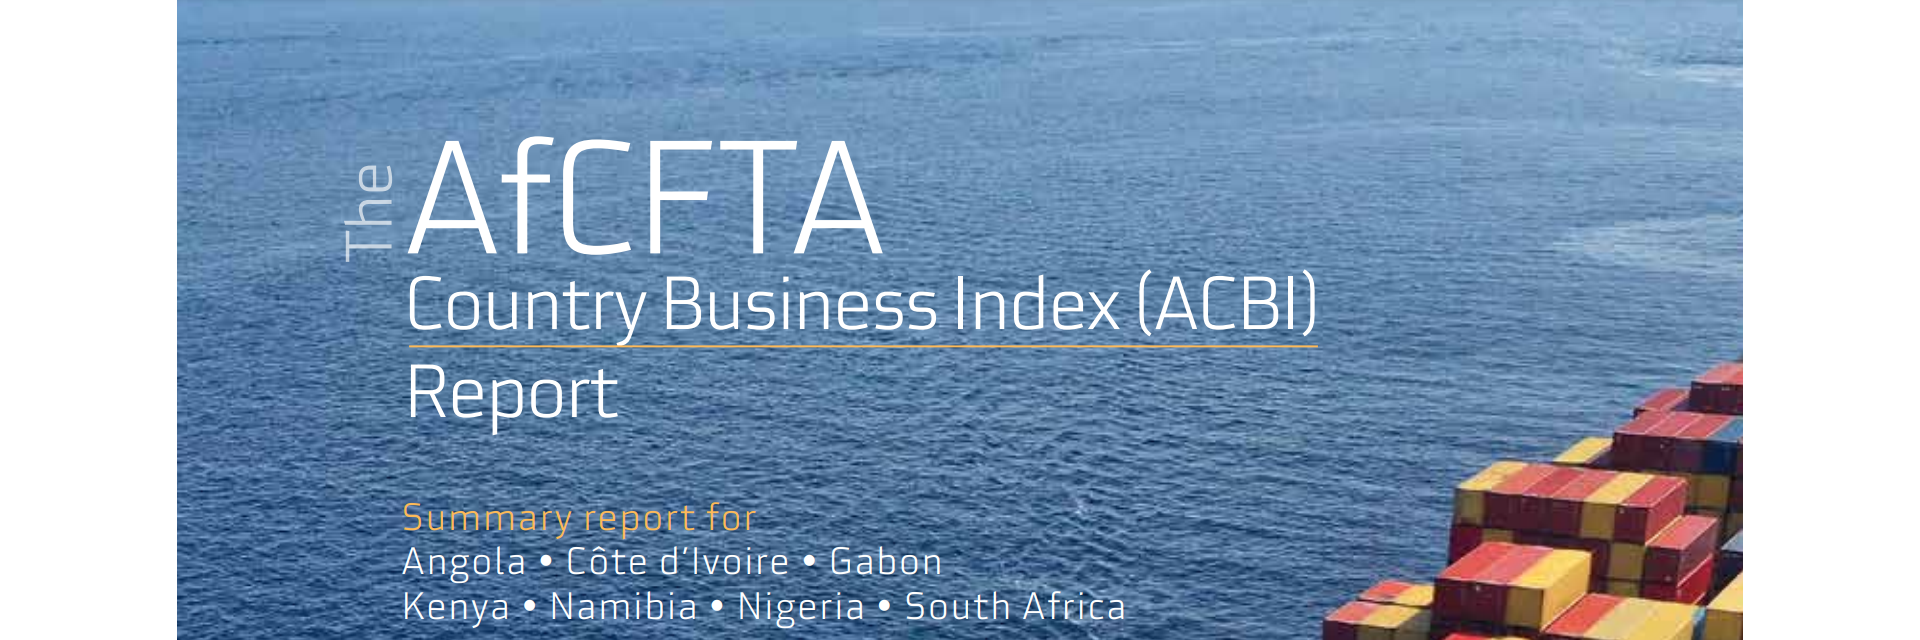 High-level event to launch ECA reports on the African Continental Free Trade Area (AfCFTA) and the Private-sector